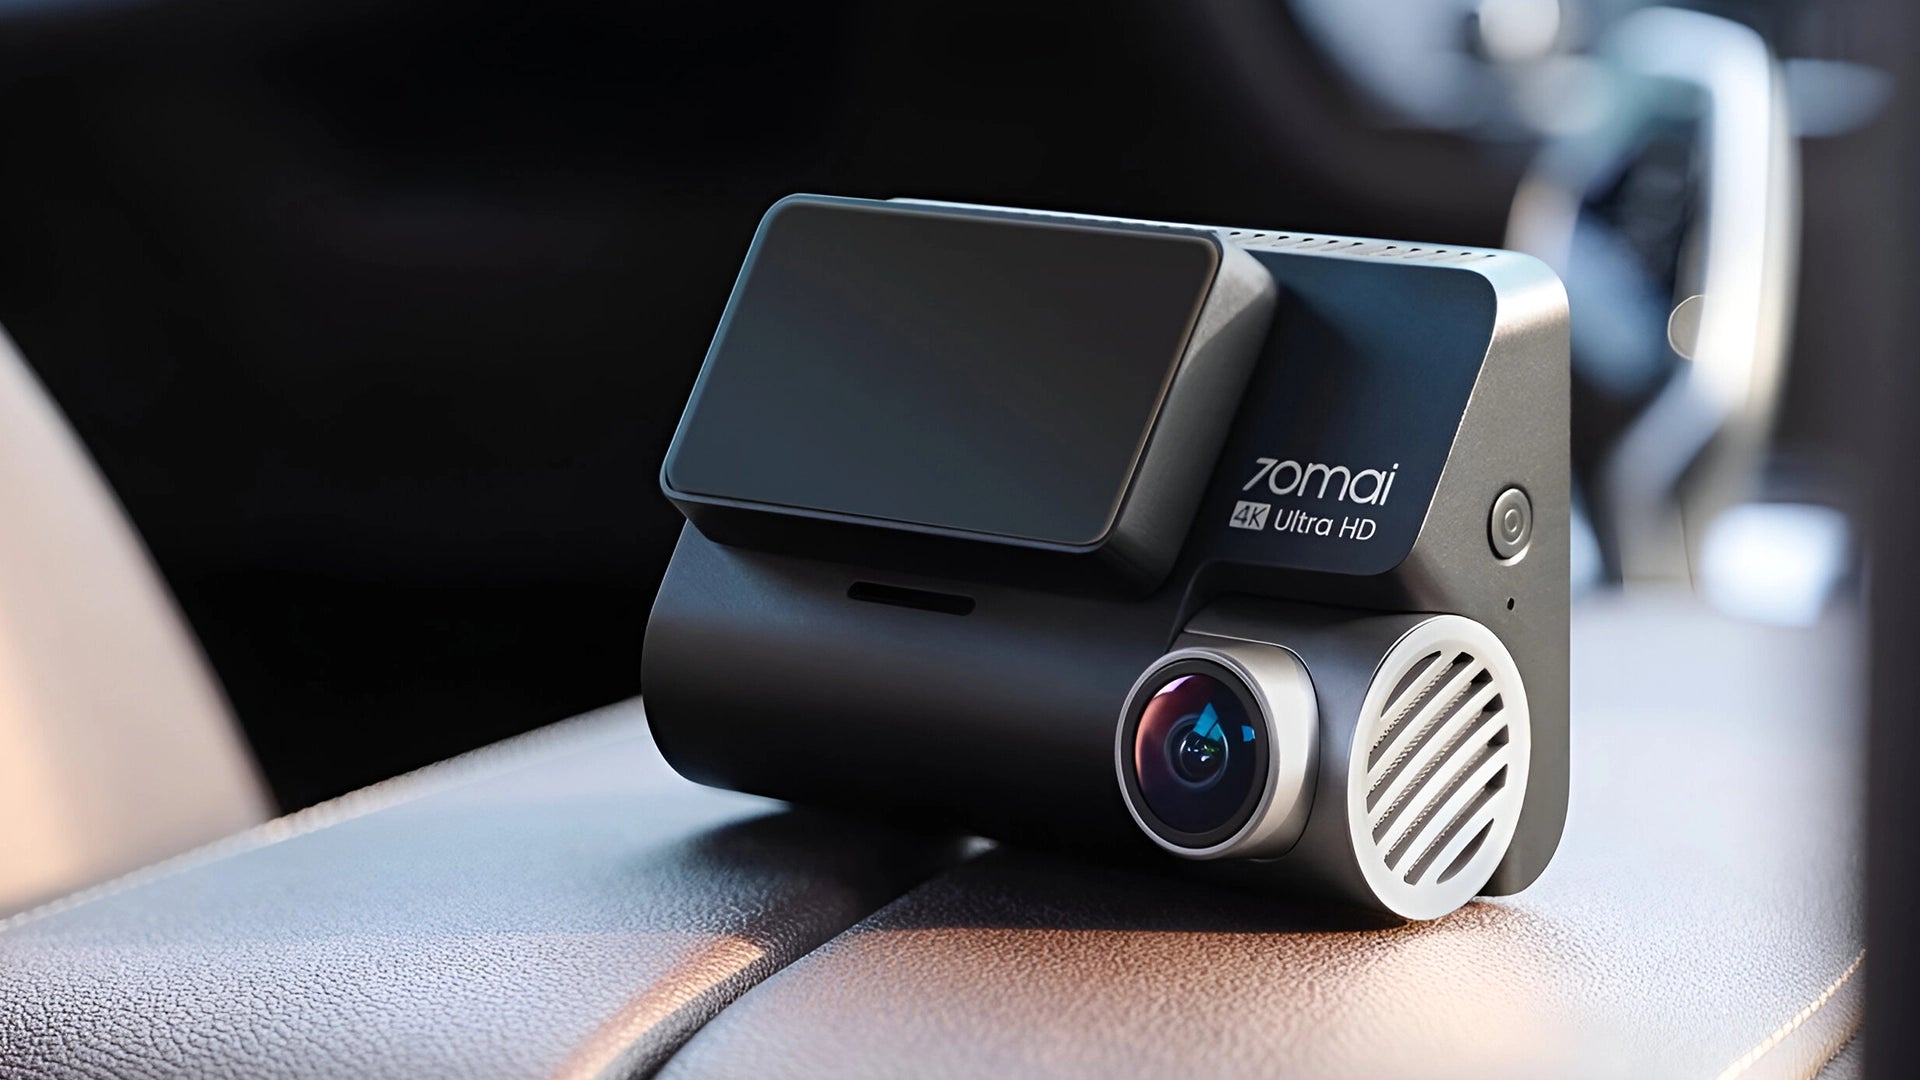 A close-up of a Zomai Ultra HD dashcam positioned on a car dashboard, with a focus on the camera lens and ventilation grill, suggesting high-quality recording capabilities